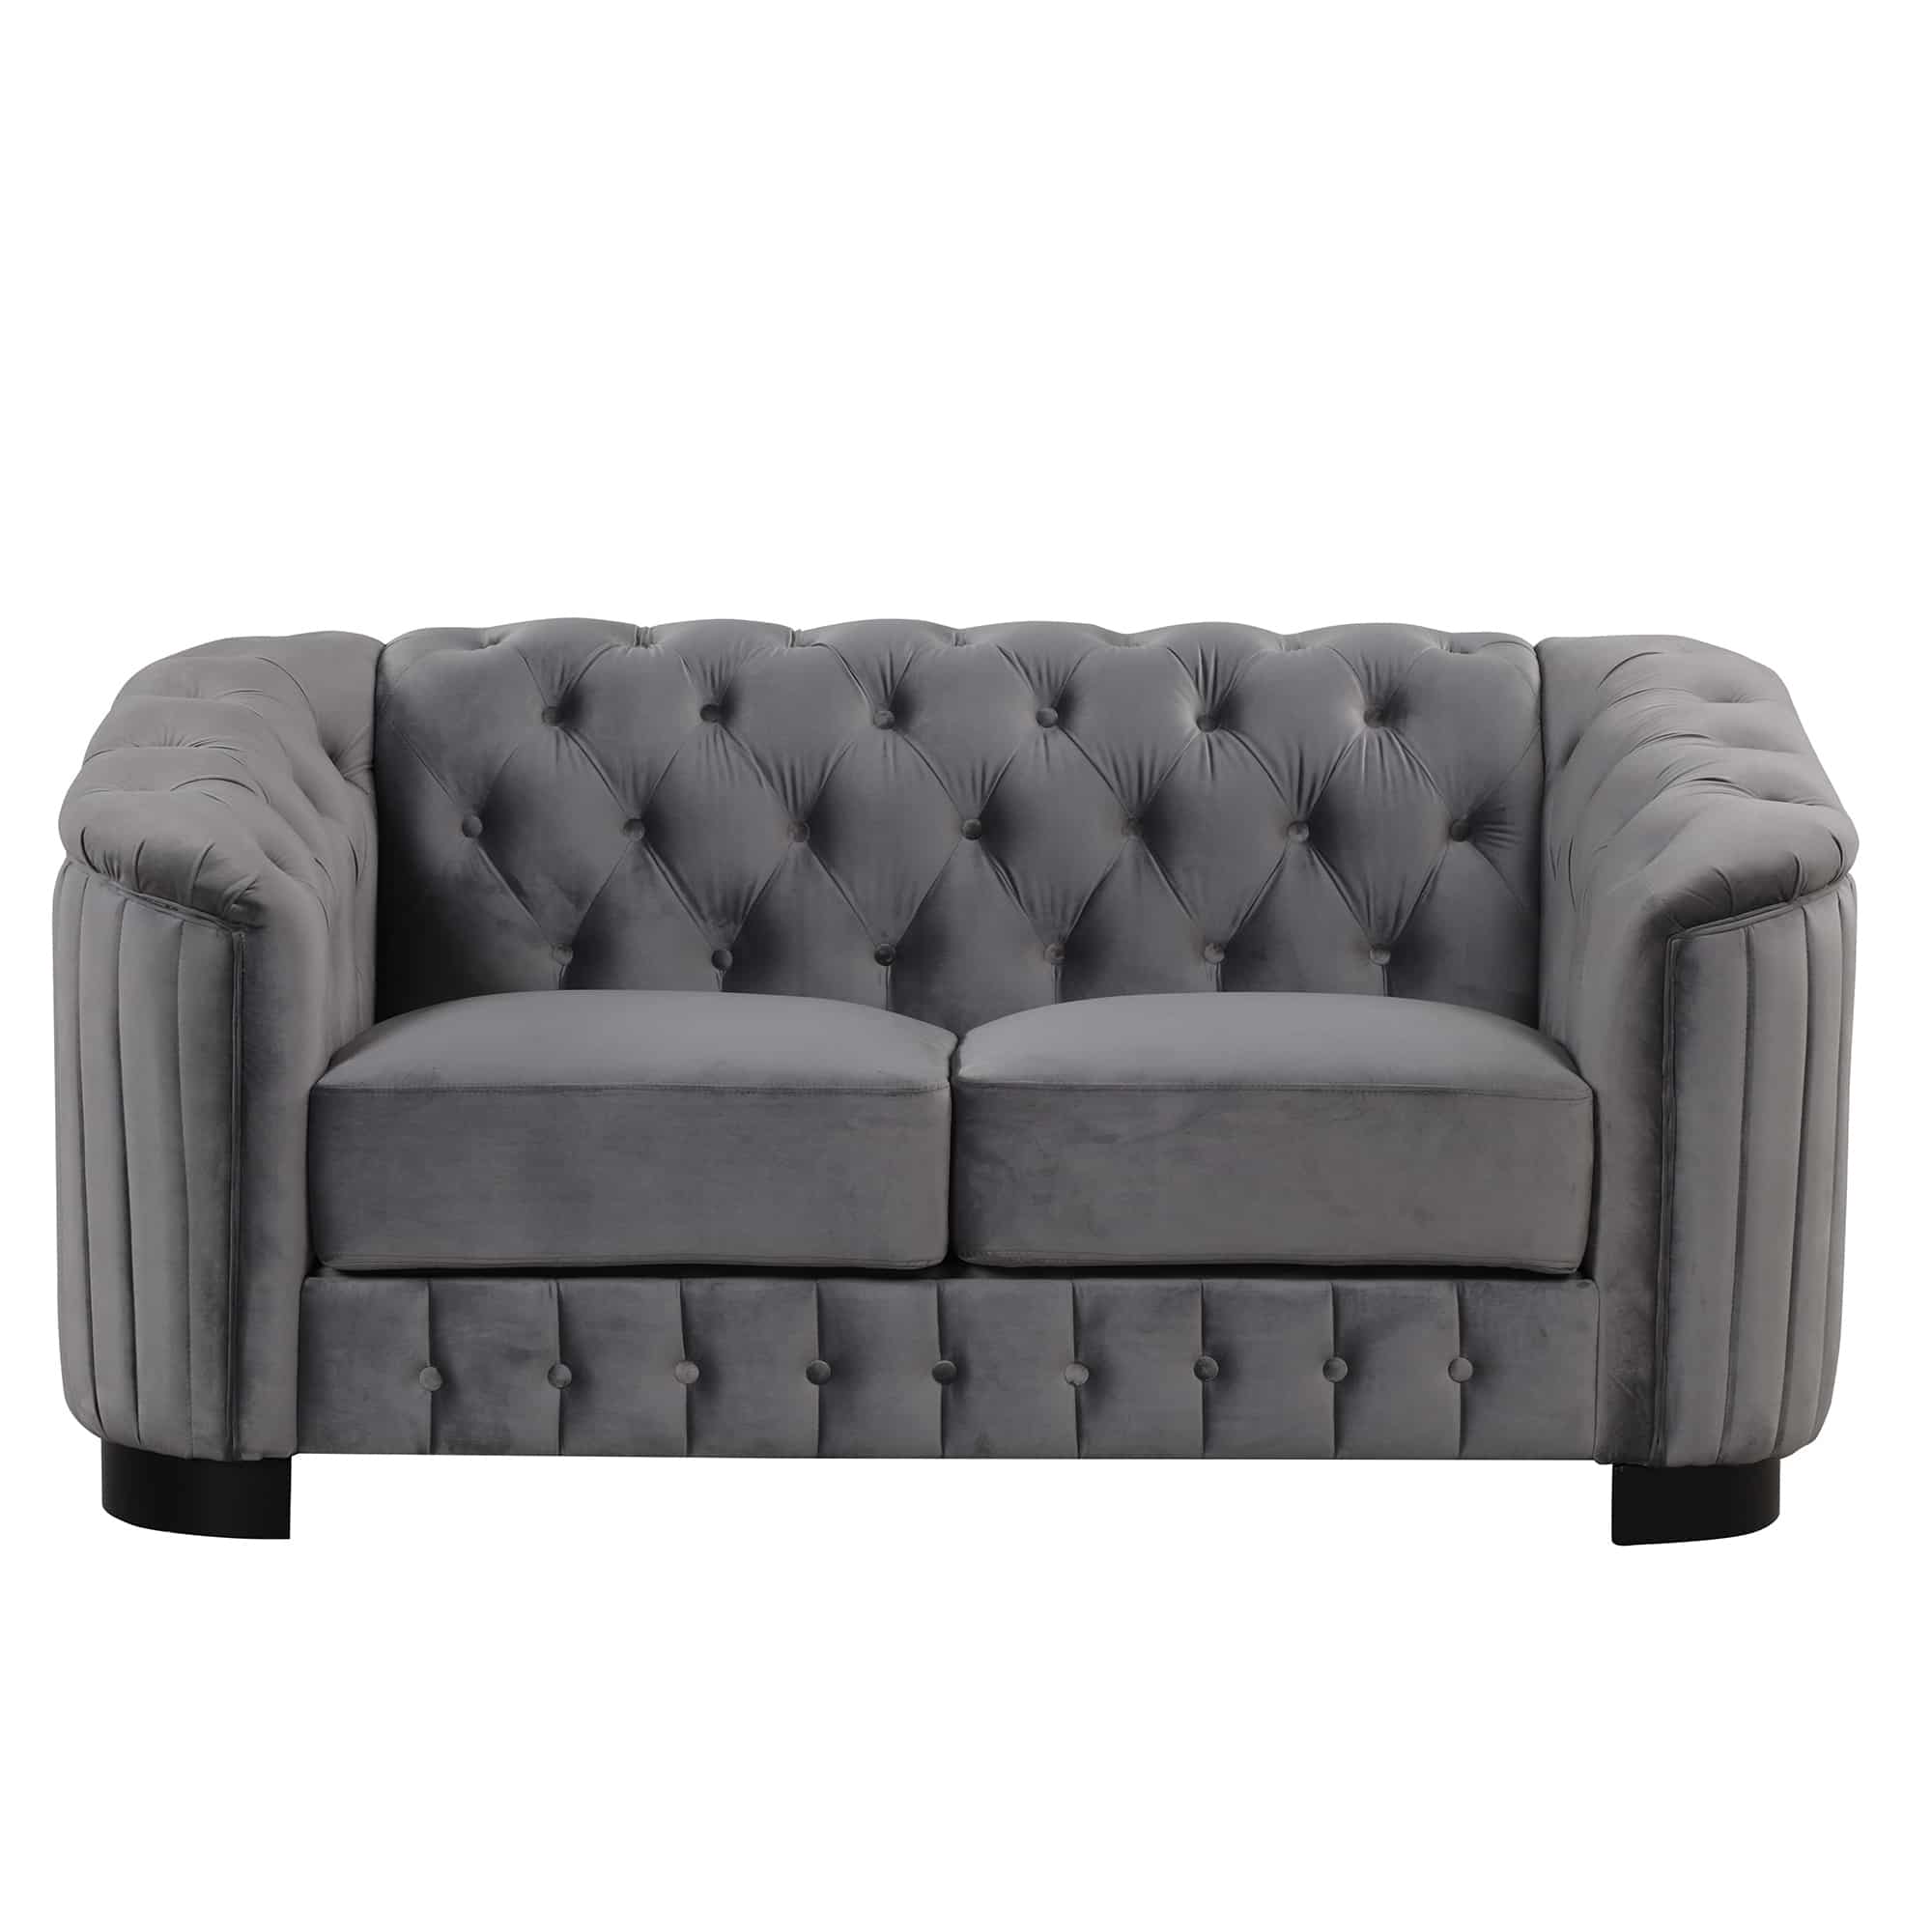 Velvet Upholstered Loveseat Sofa, Modern Button Tufted Back Sofa with Thick Removable Seat Cushion, 2-Person Loveseat Sofa Couch